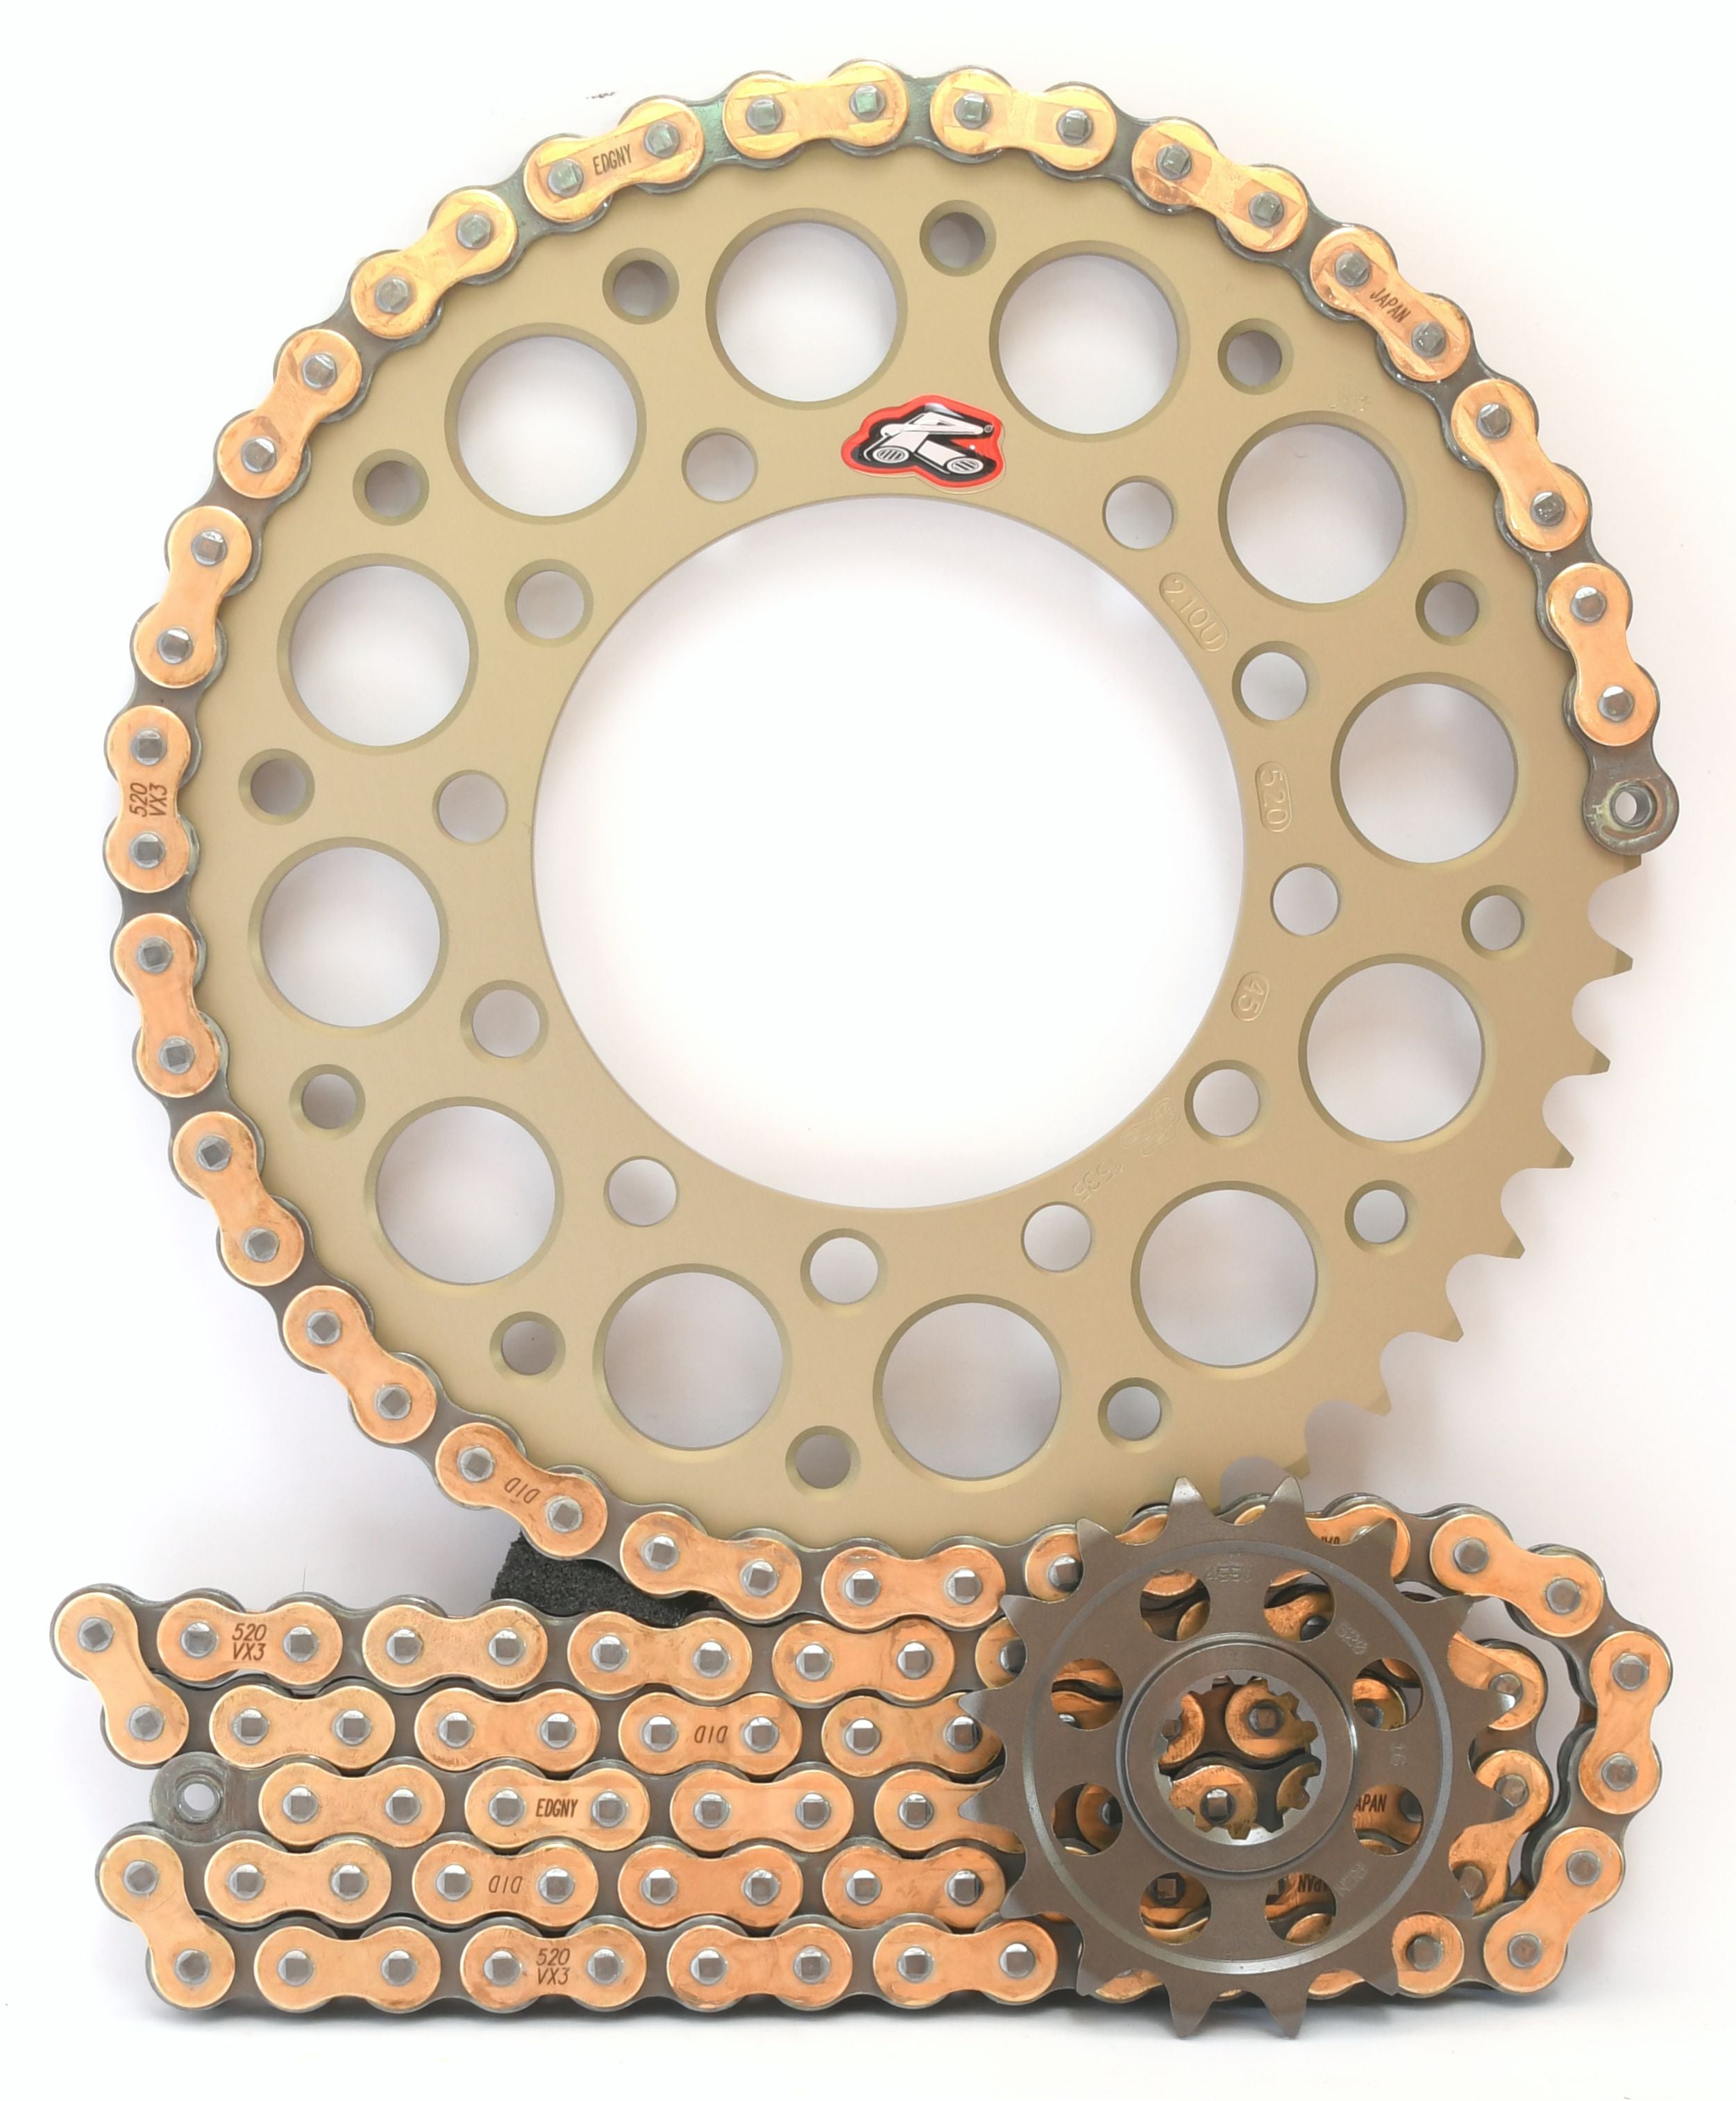 Renthal Ultralight and DID Chain & Sprocket Kit for Ducati Panigale 959 2016-2019 - Standard Gearing